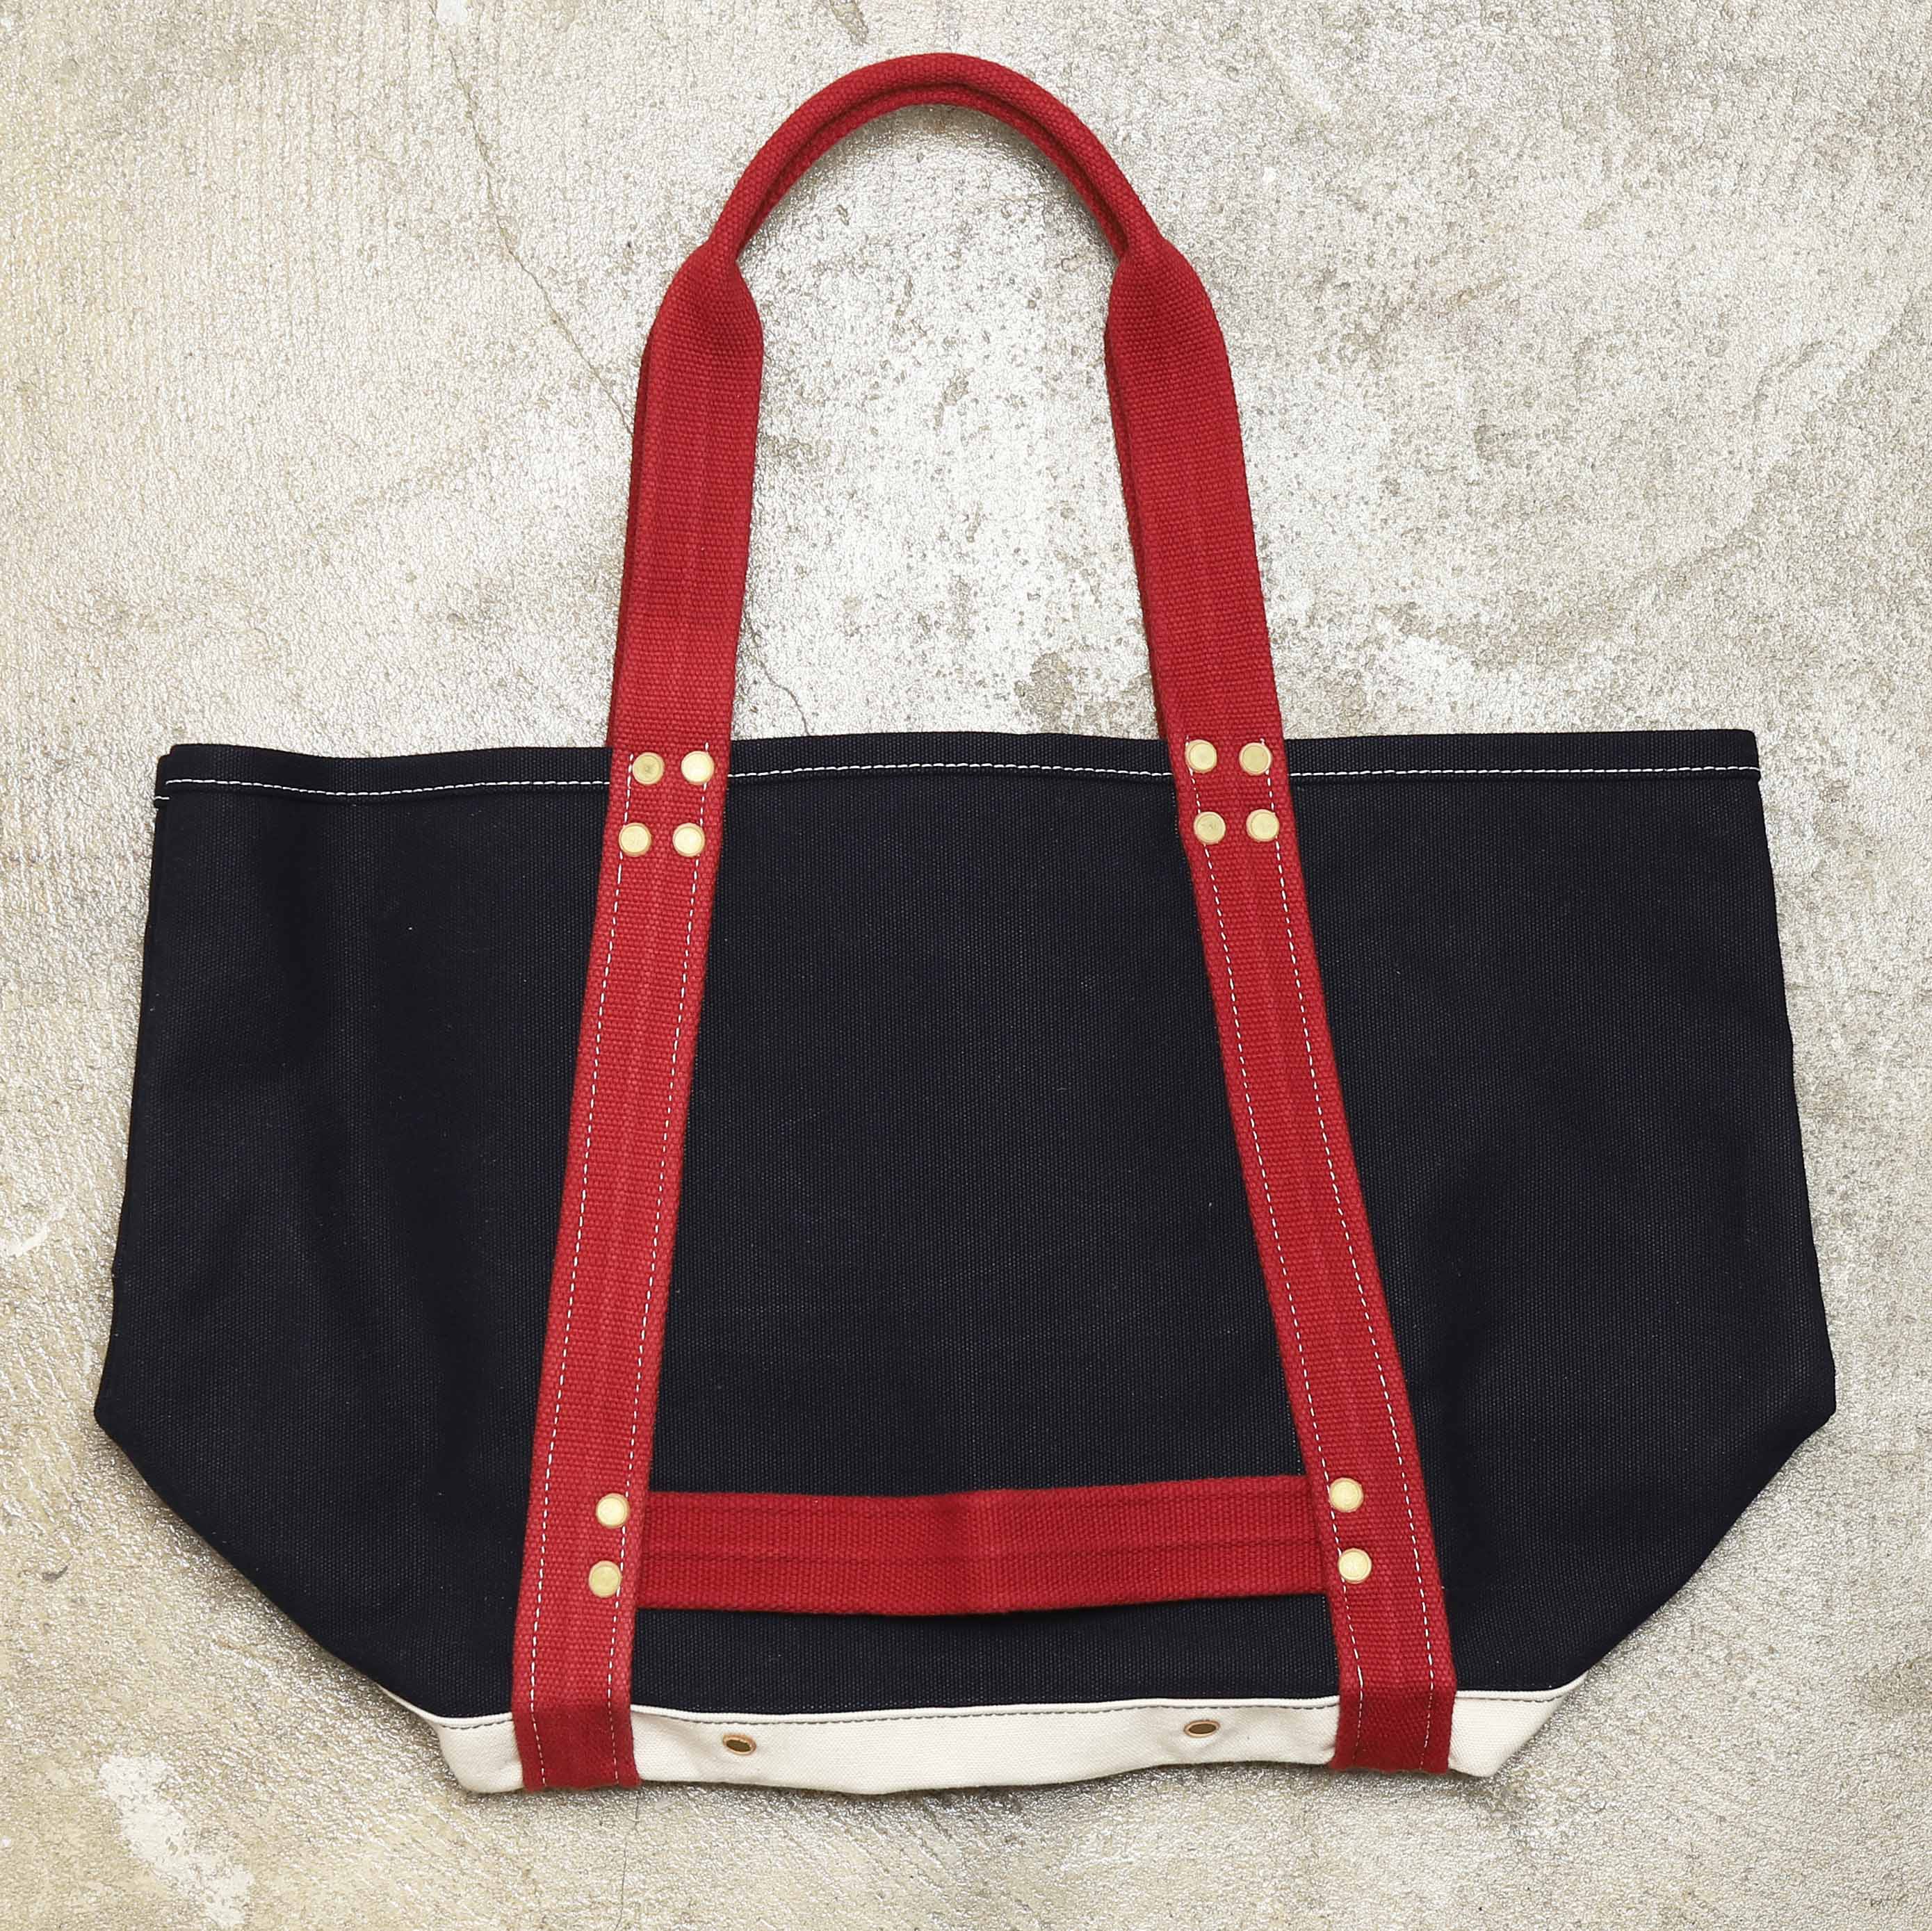 RALPH LAUREN RUGBY HEAVY CANVAS TOTE BAG - NAVY/RED